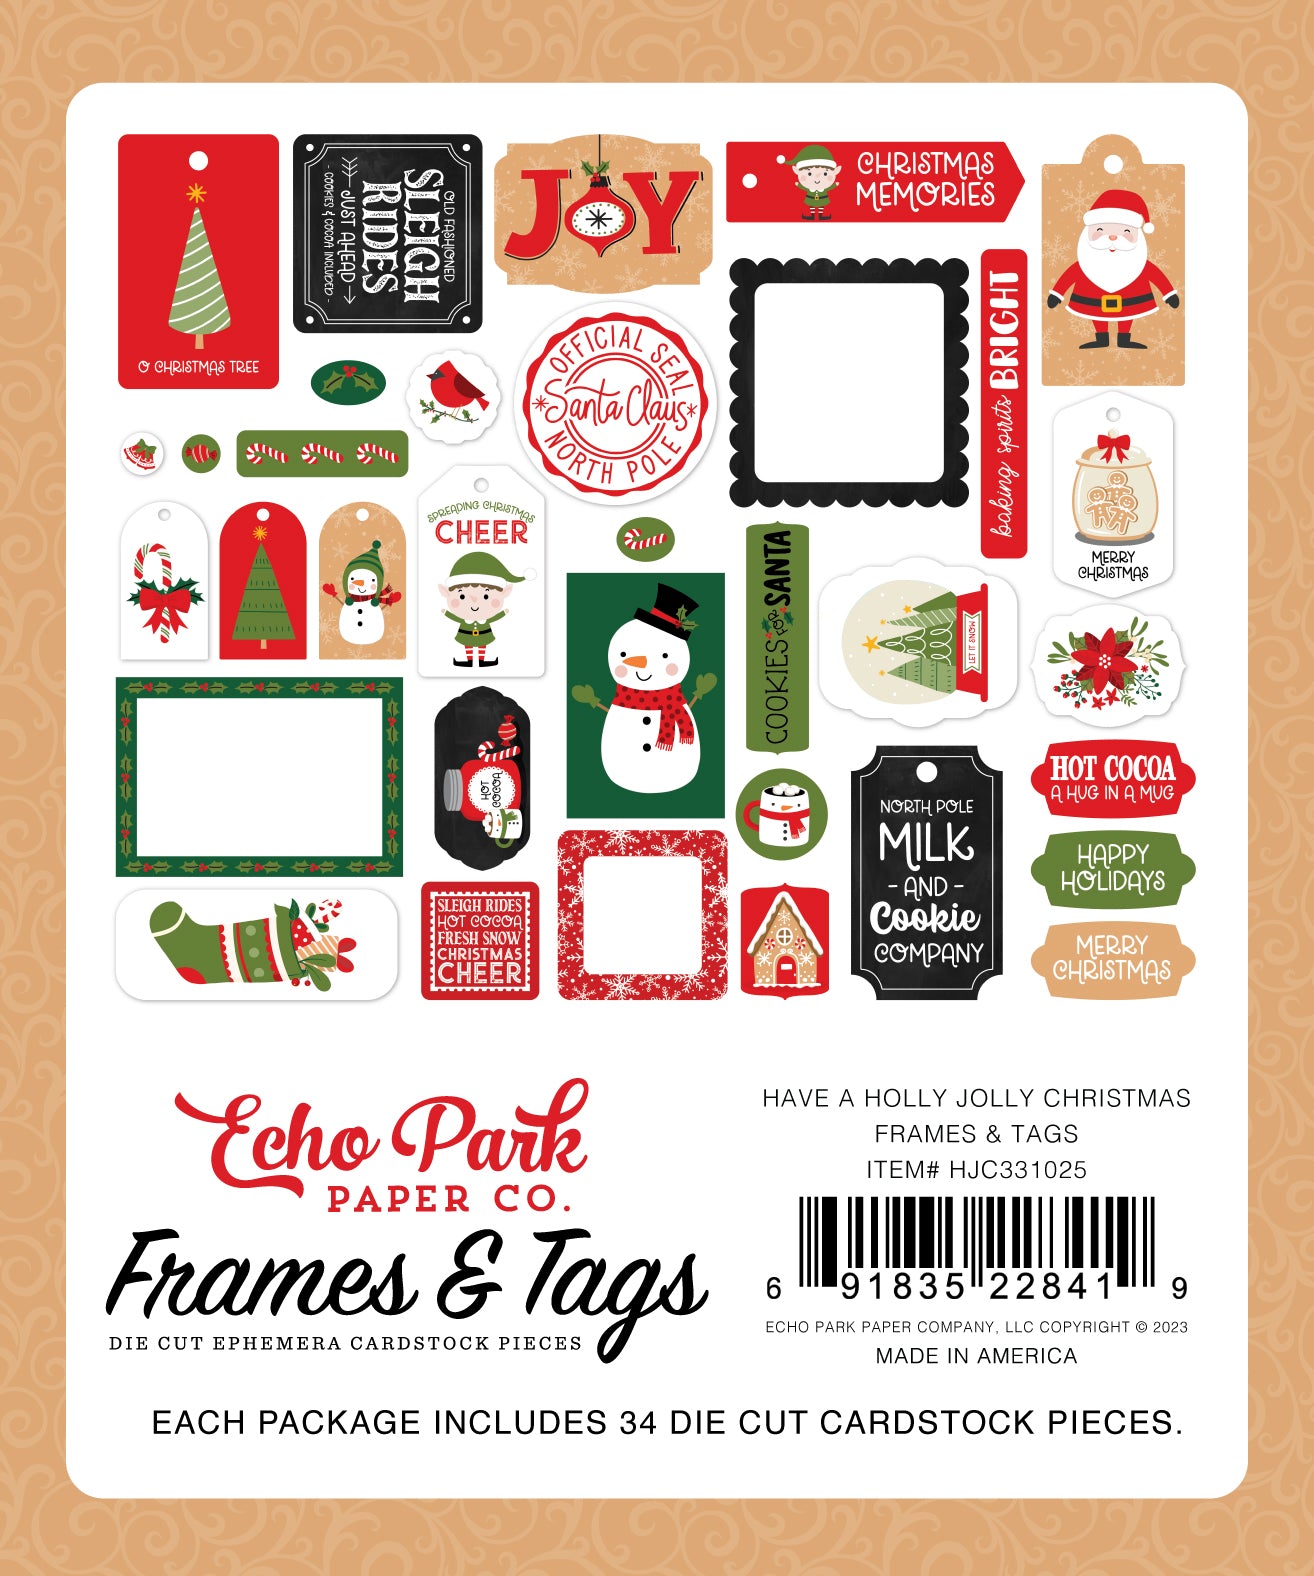 Have A Holly Jolly Christmas: Symbol Of Christmas 12x12 Patterned Paper -  Echo Park Paper Co.